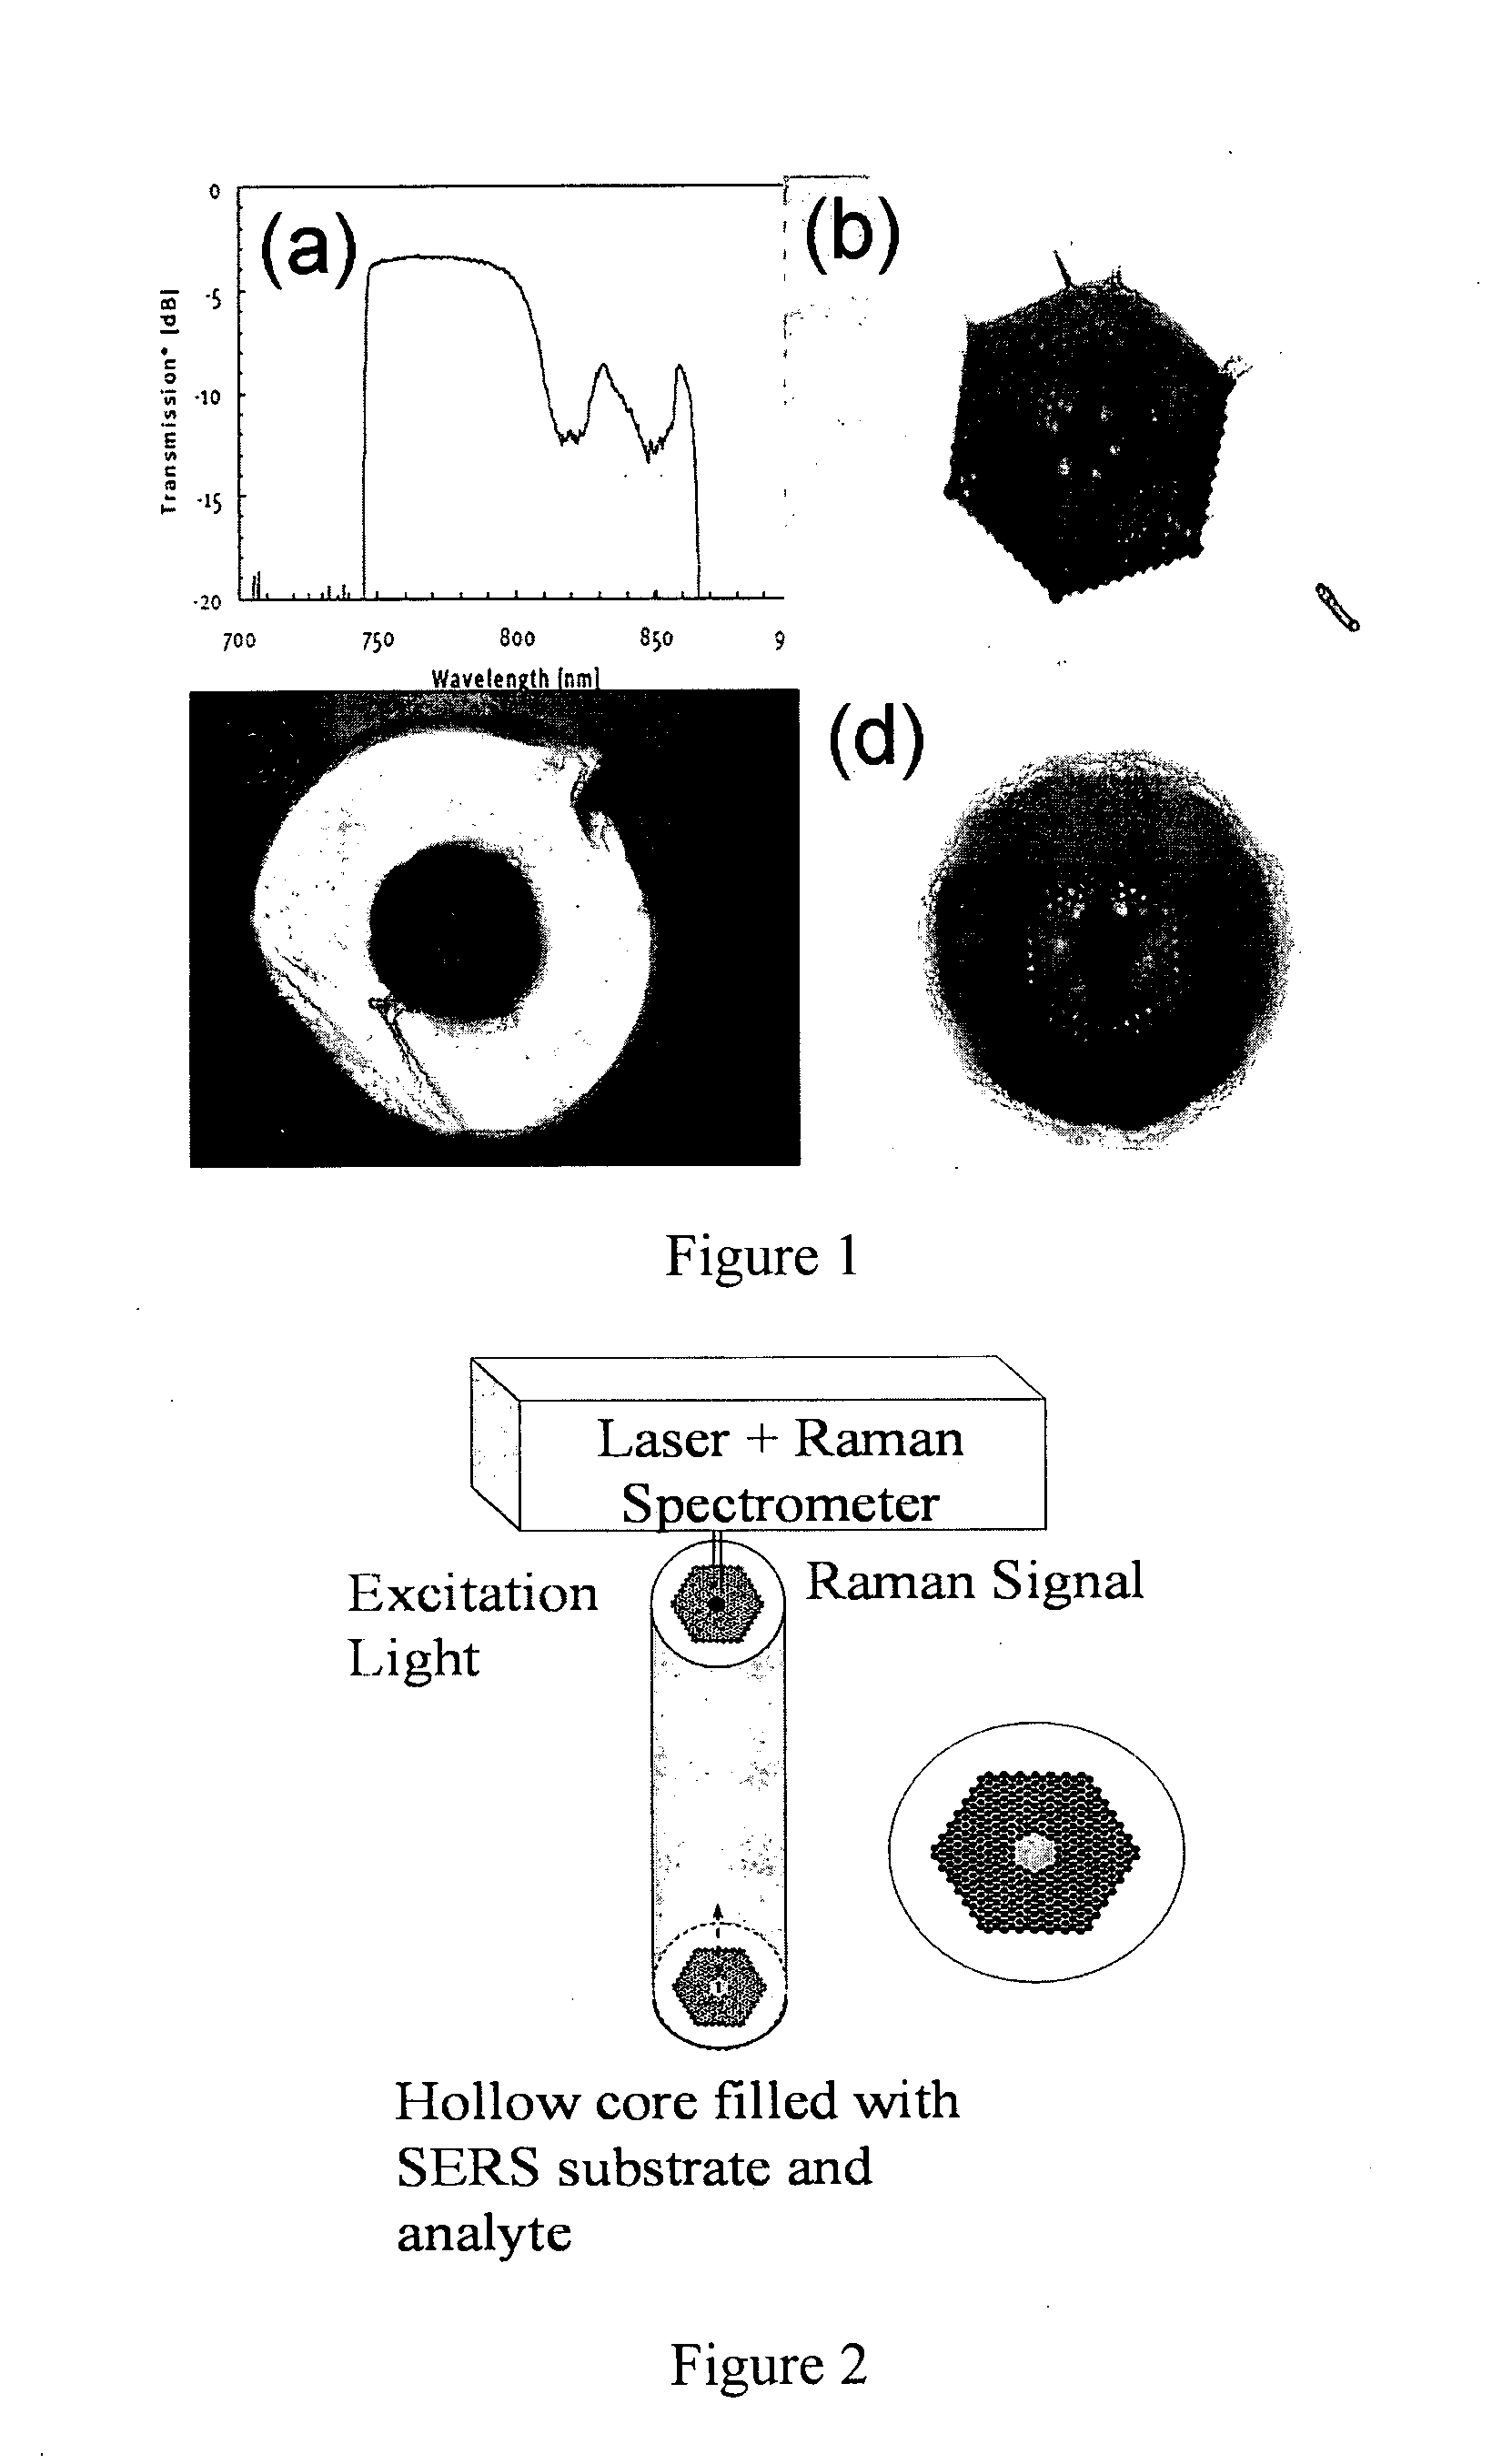 Liquid core photonic crystal fiber biosensors using surface enhanced raman scattering and methods for their use